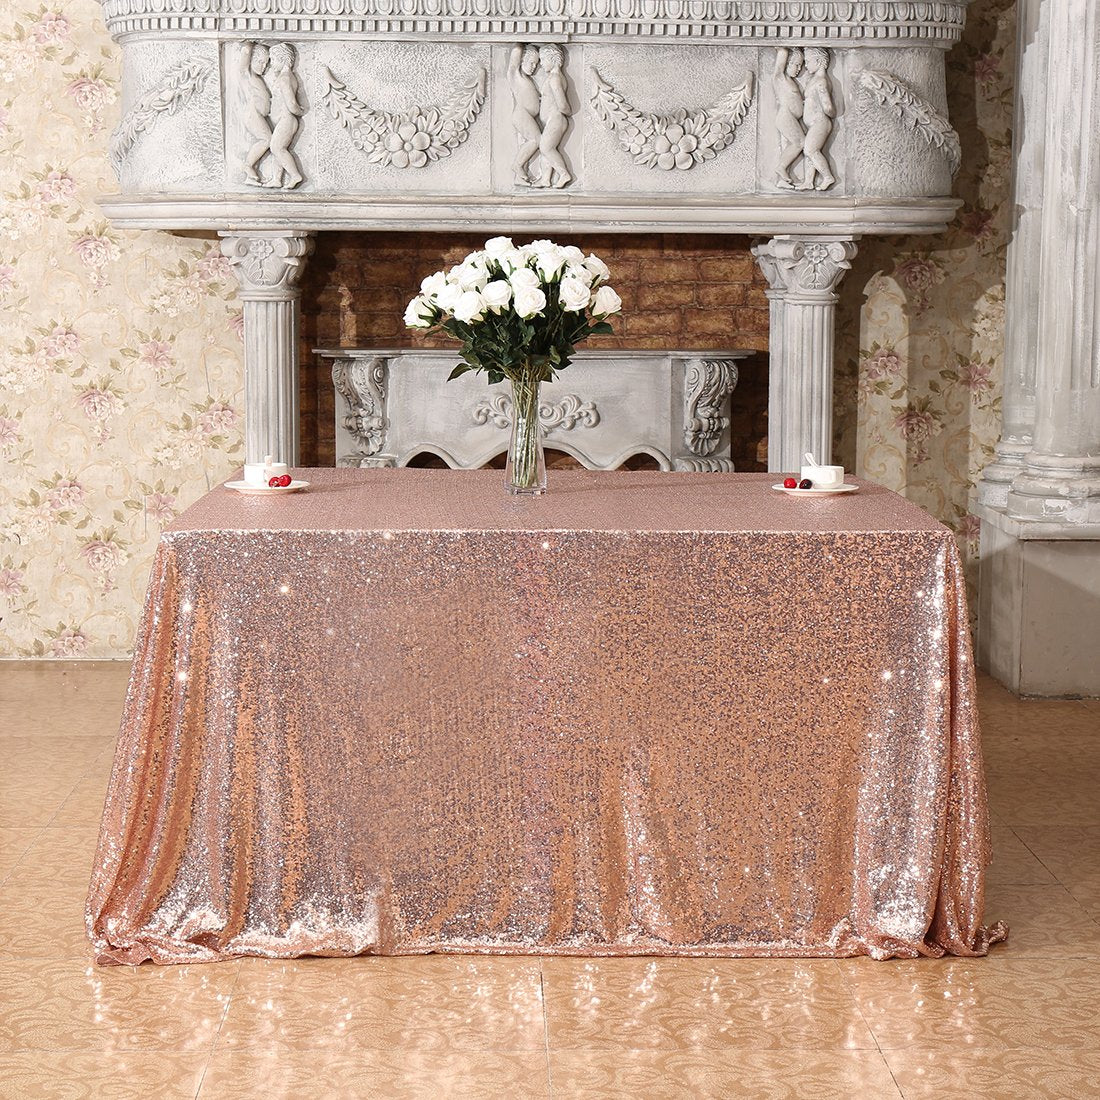 3E Home 127x127cm 50" X 50" Rose Gold Sequin Tablecloth Square Table Overlay Wedding Party Banquet